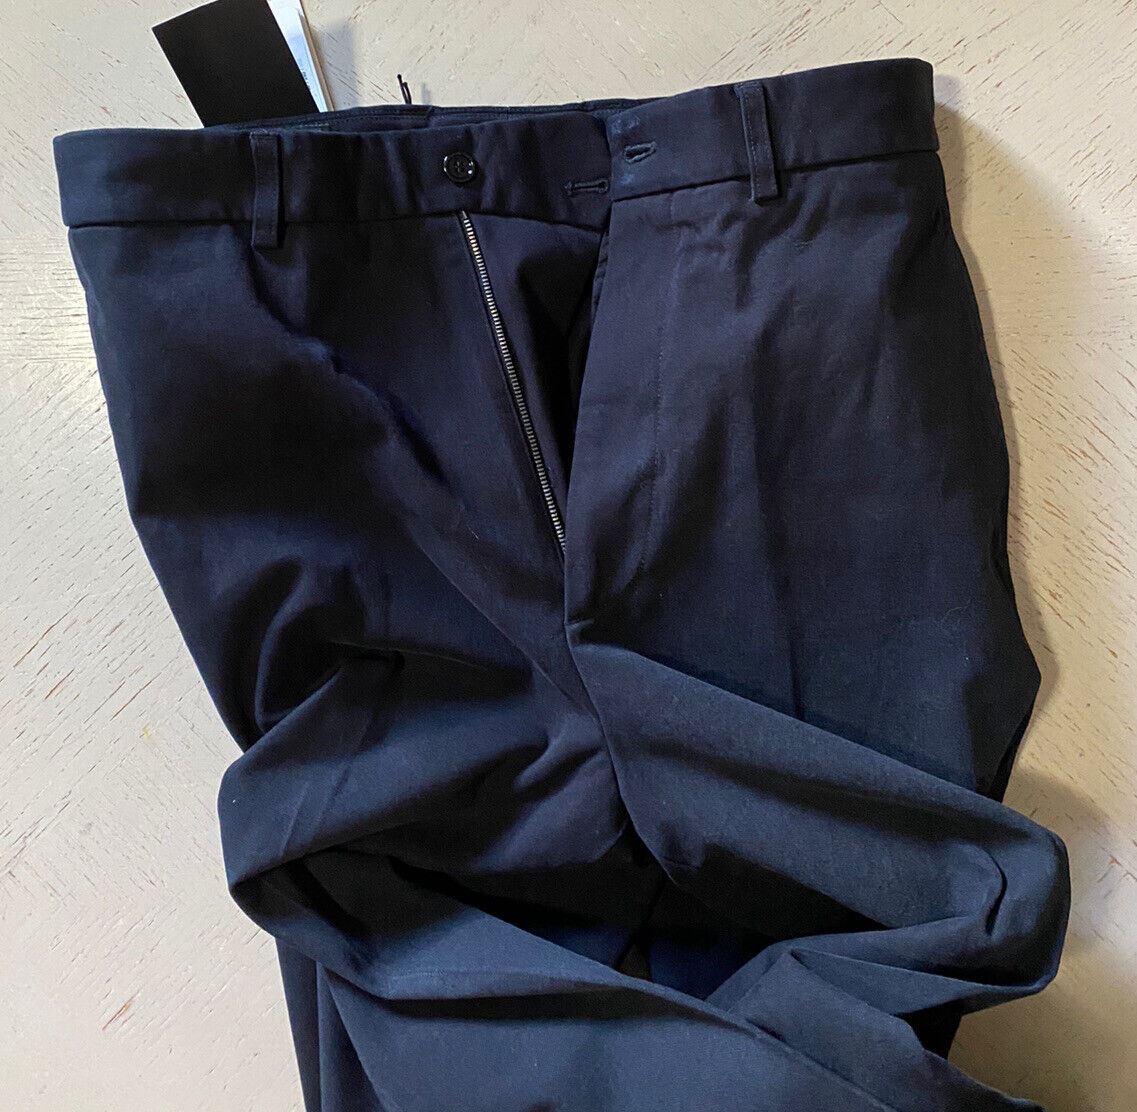 NWT $1150 Gucci Men’s Cotton Pants Color Navy Size 28 US Italy